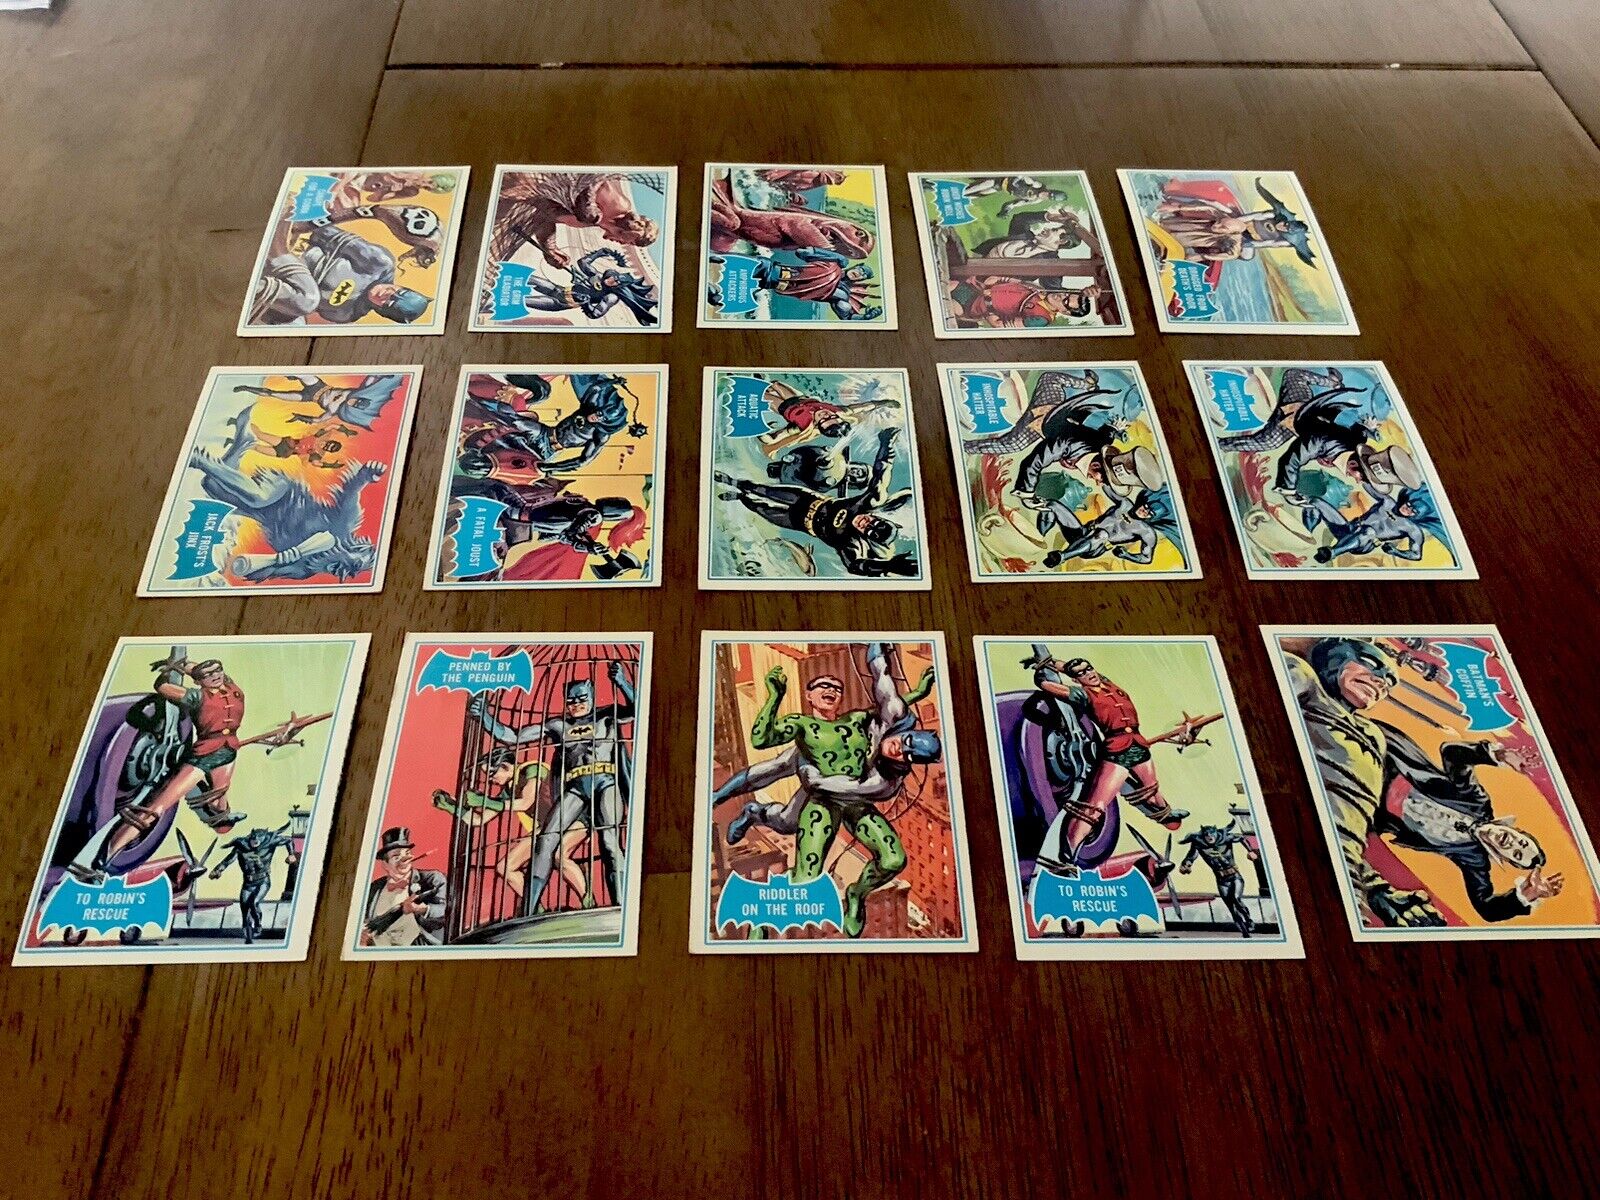 1966 Topps Batman Blue Bat Card Lot Of 15 Cards - Very Nice Condition